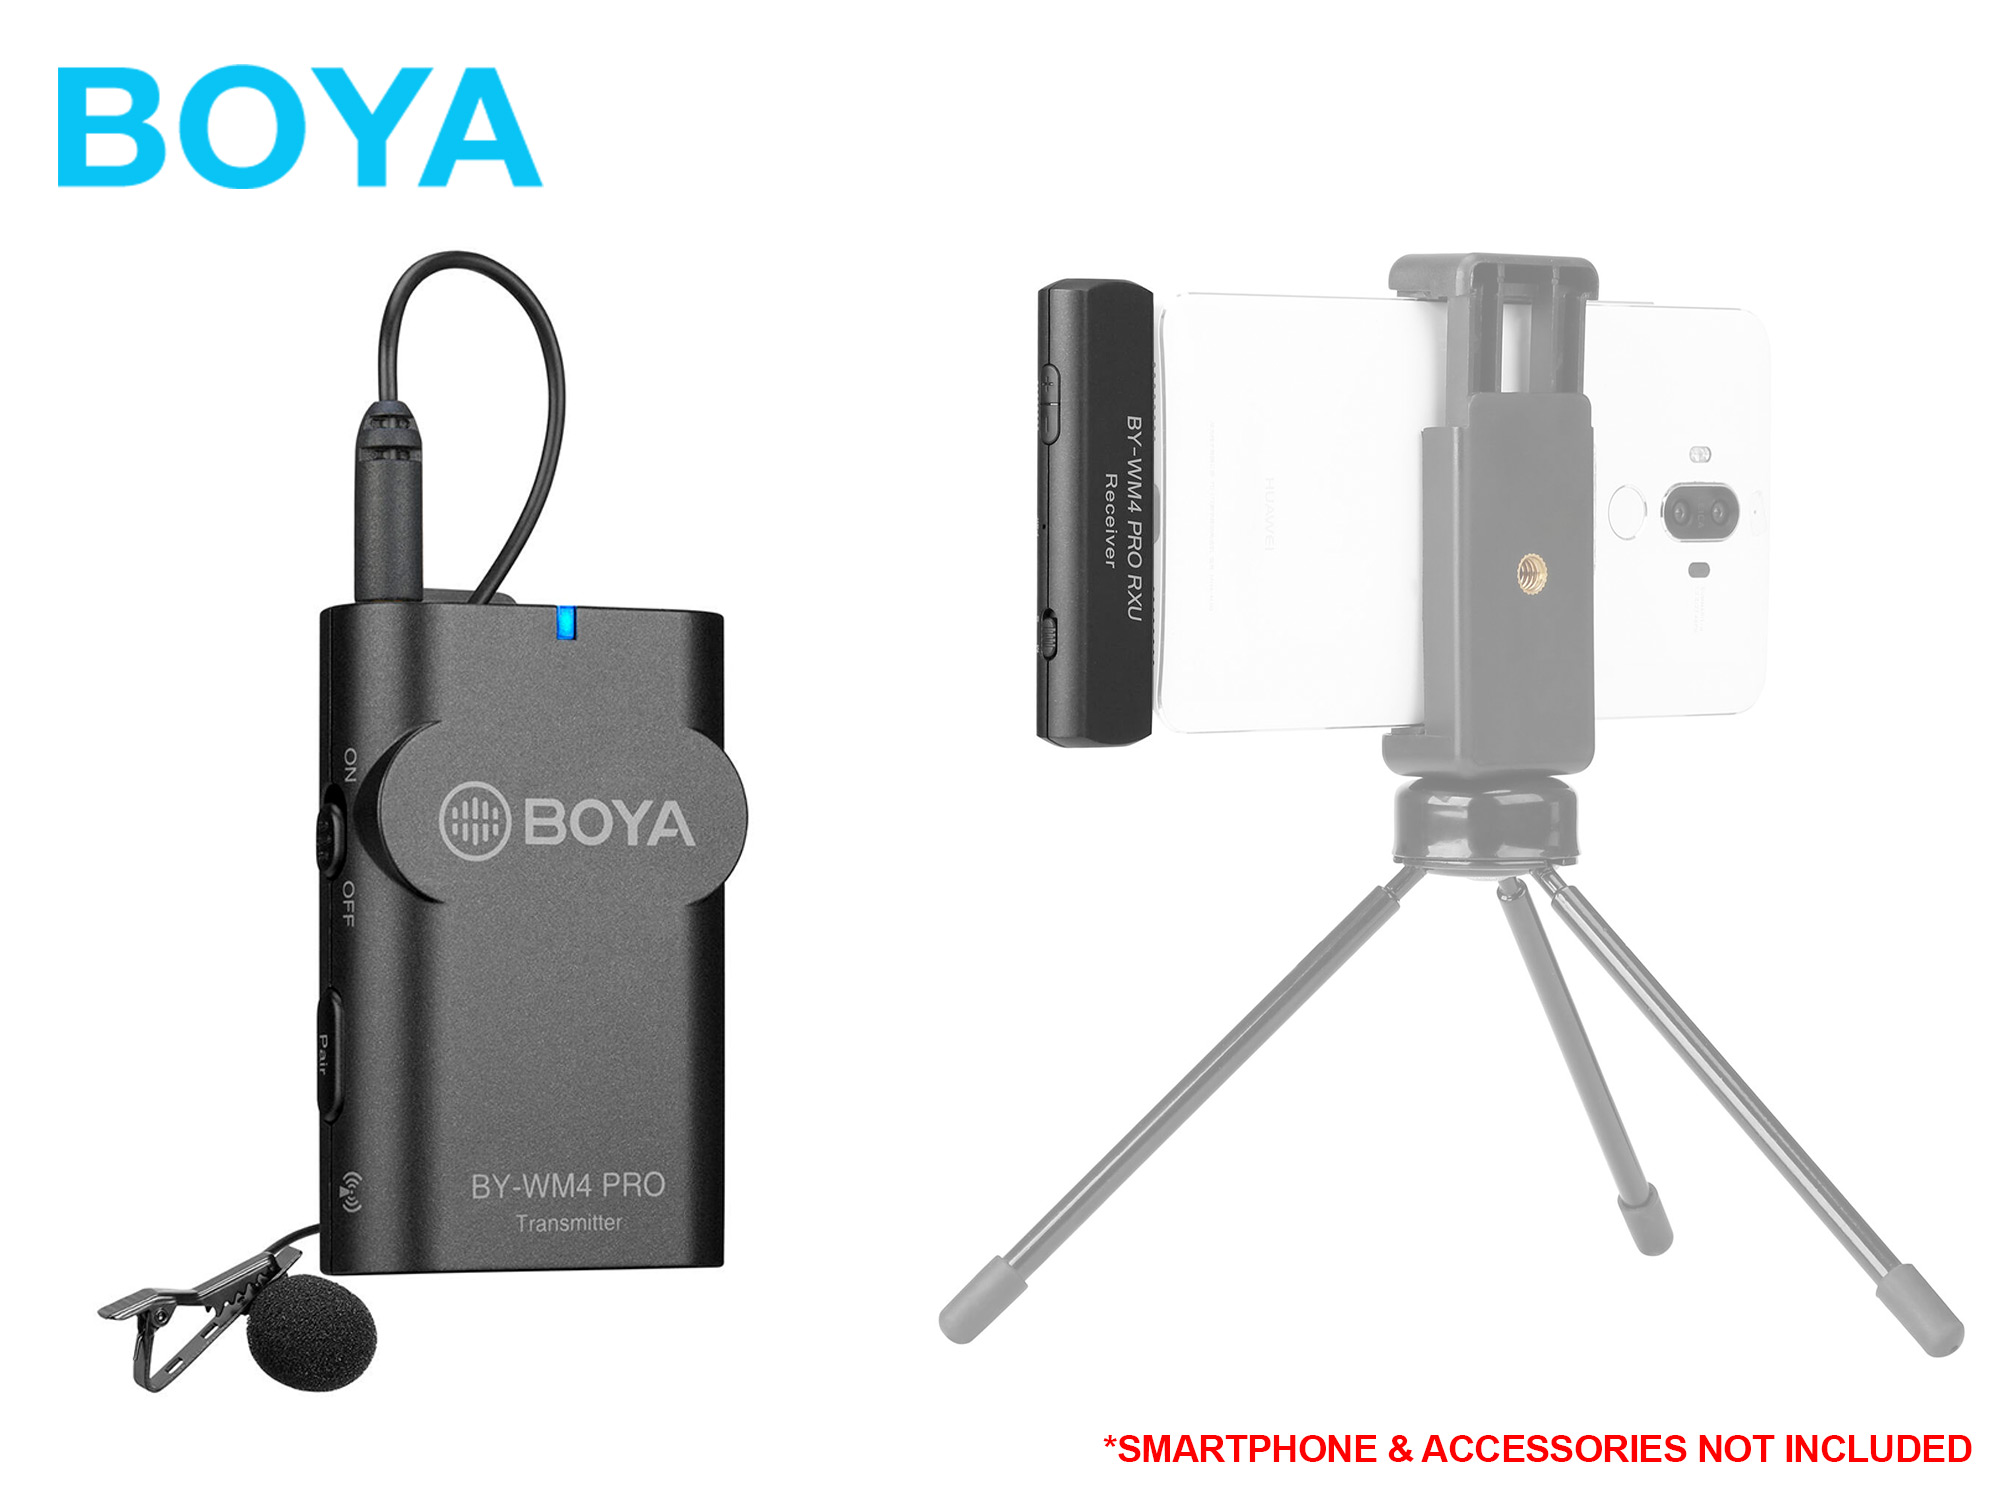 Boya BY-WM4 PRO K5 2.4 GHz Wireless Microphone System For Android and other Type-C devices